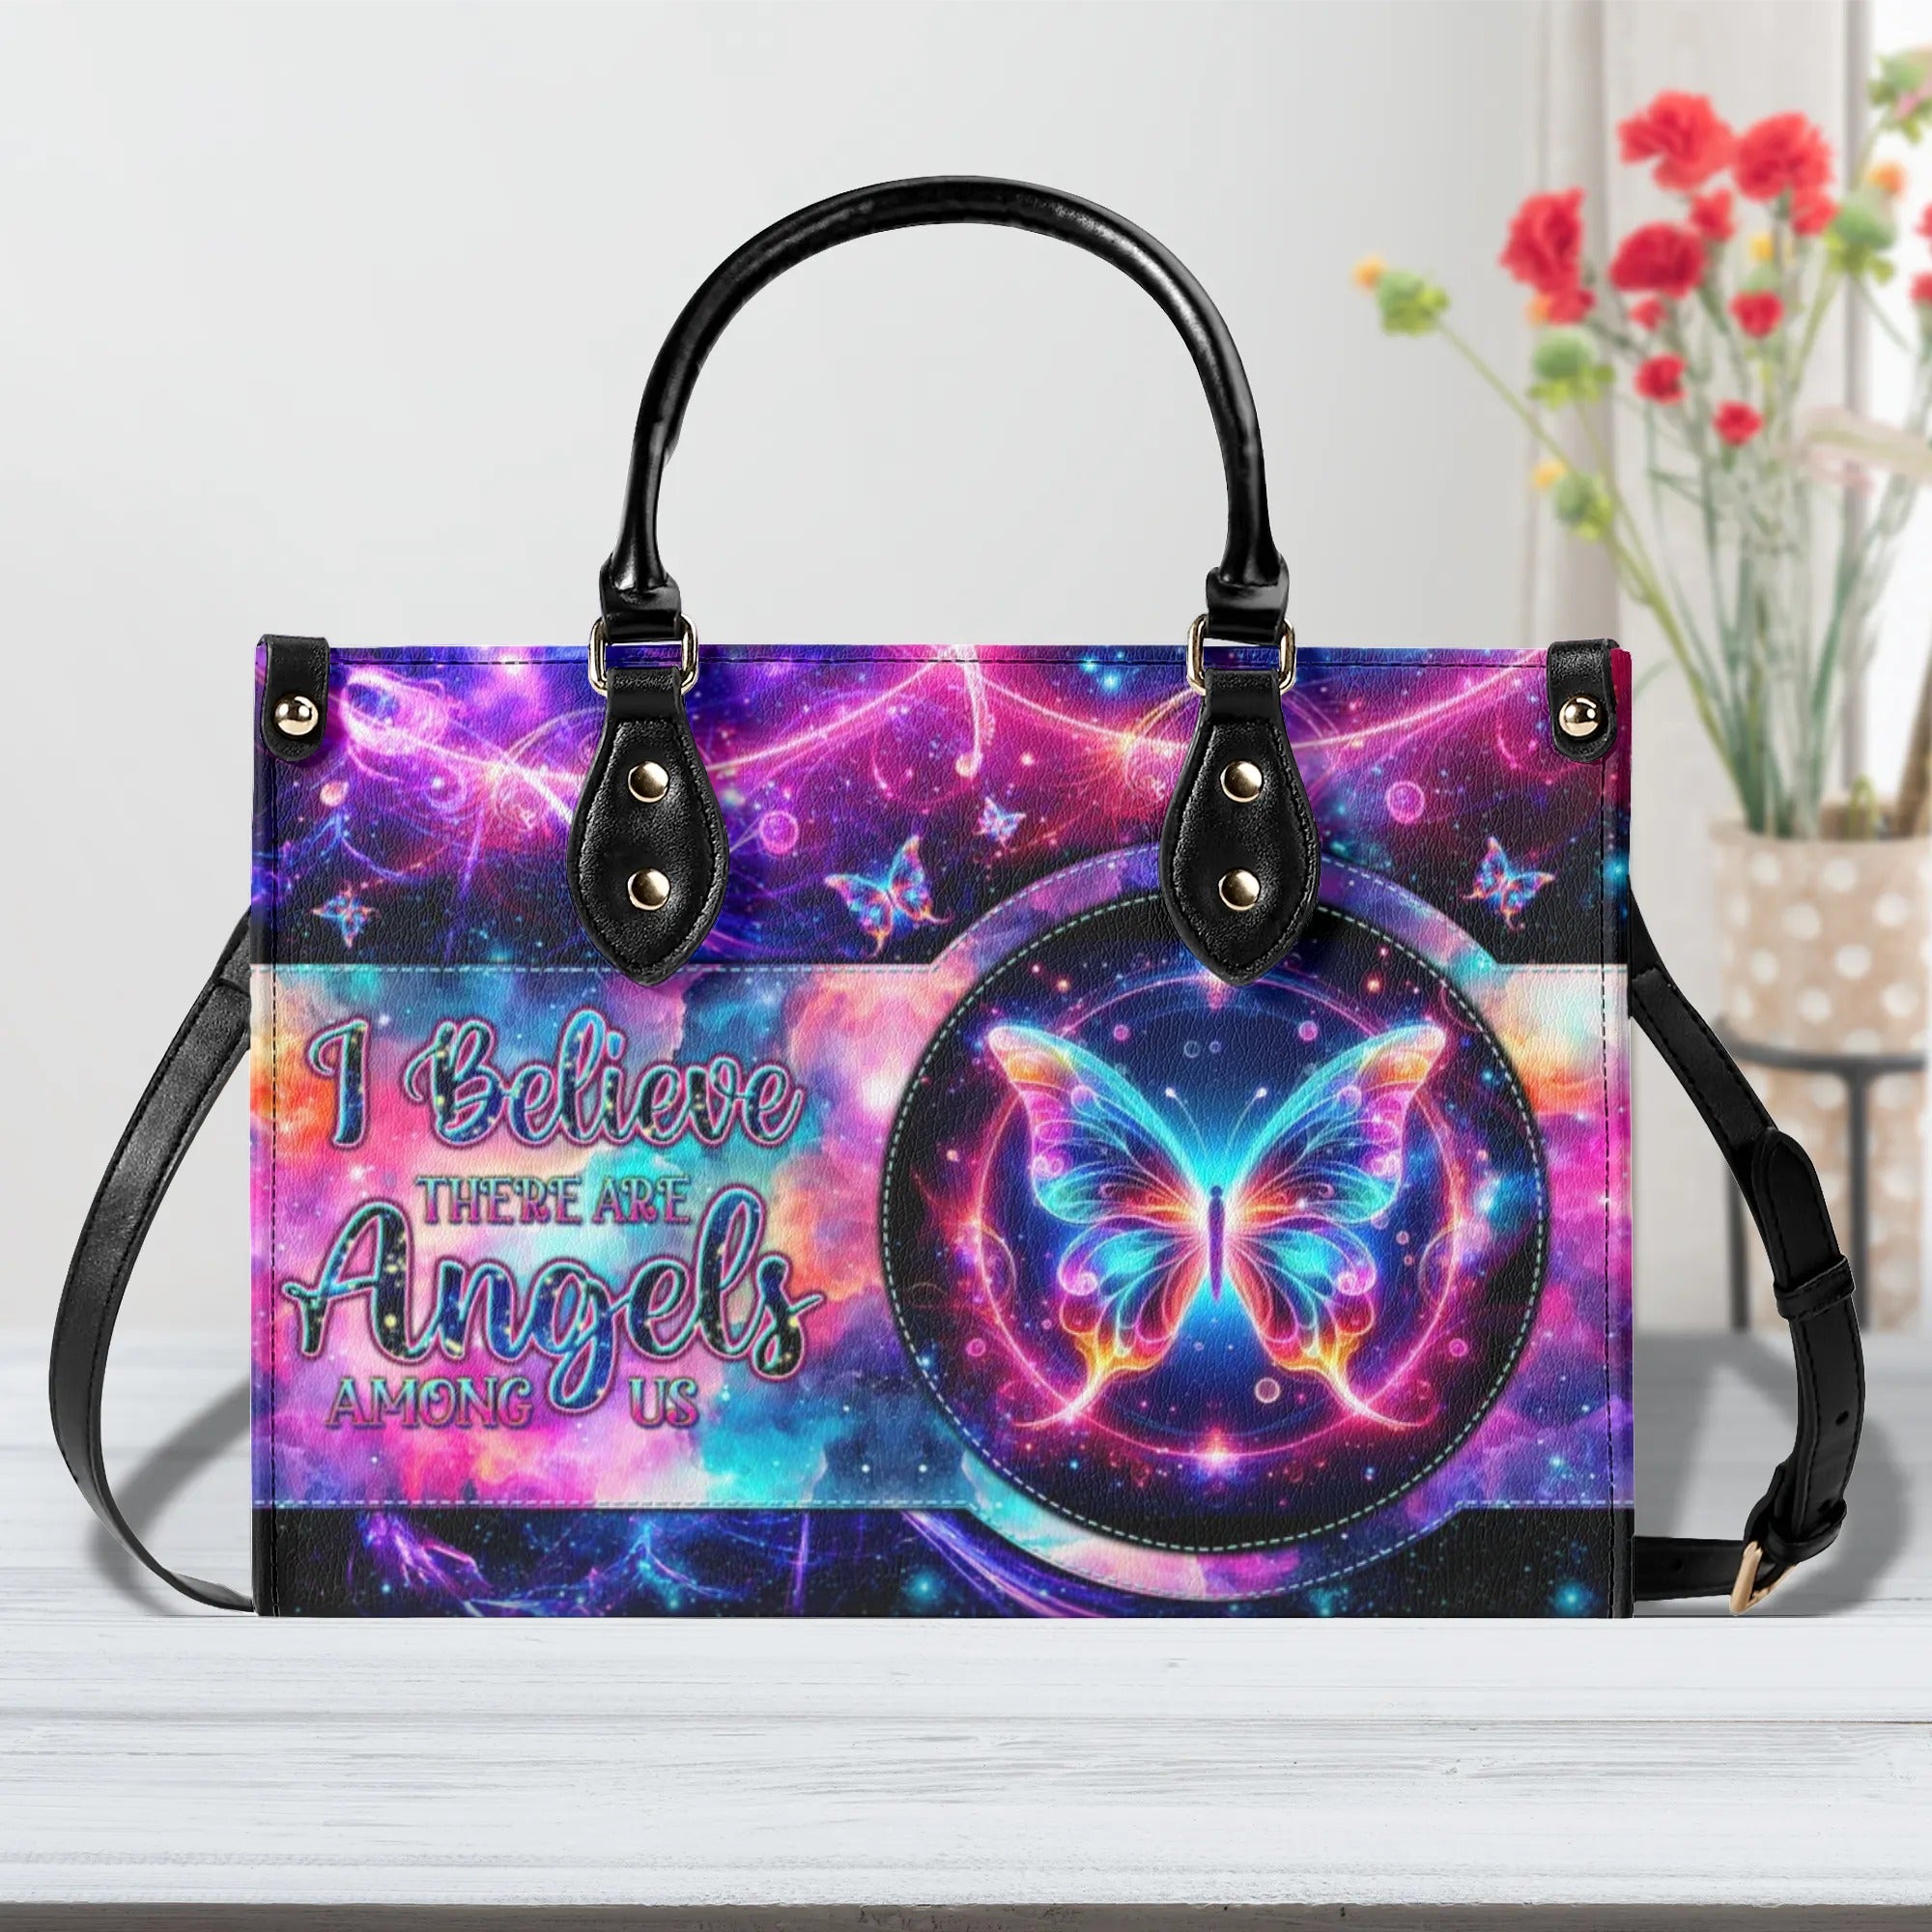 I BELIEVE THERE ARE ANGELS AMONG US BUTTERFLY LEATHER HANDBAG - TLTW0406245